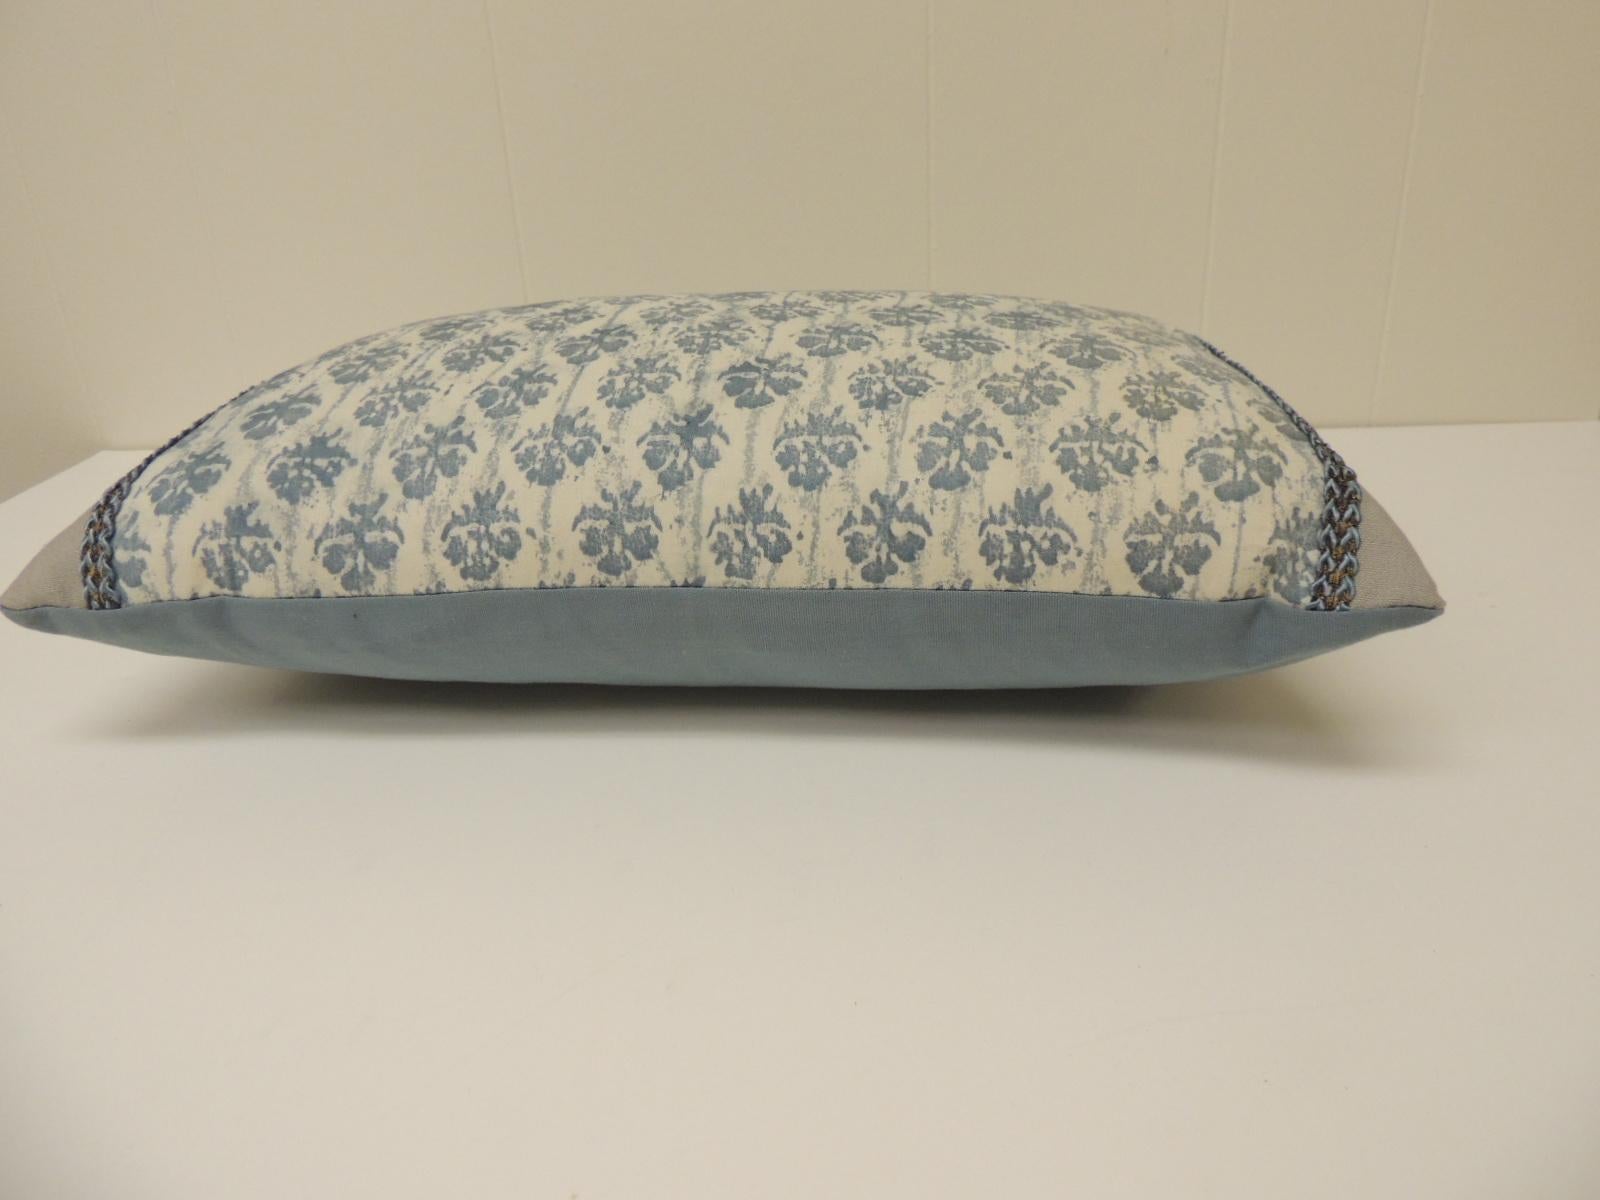 Baroque Revival Petite 1940s Italian Blue and White Fortuny Lumbar Decorative Pillow